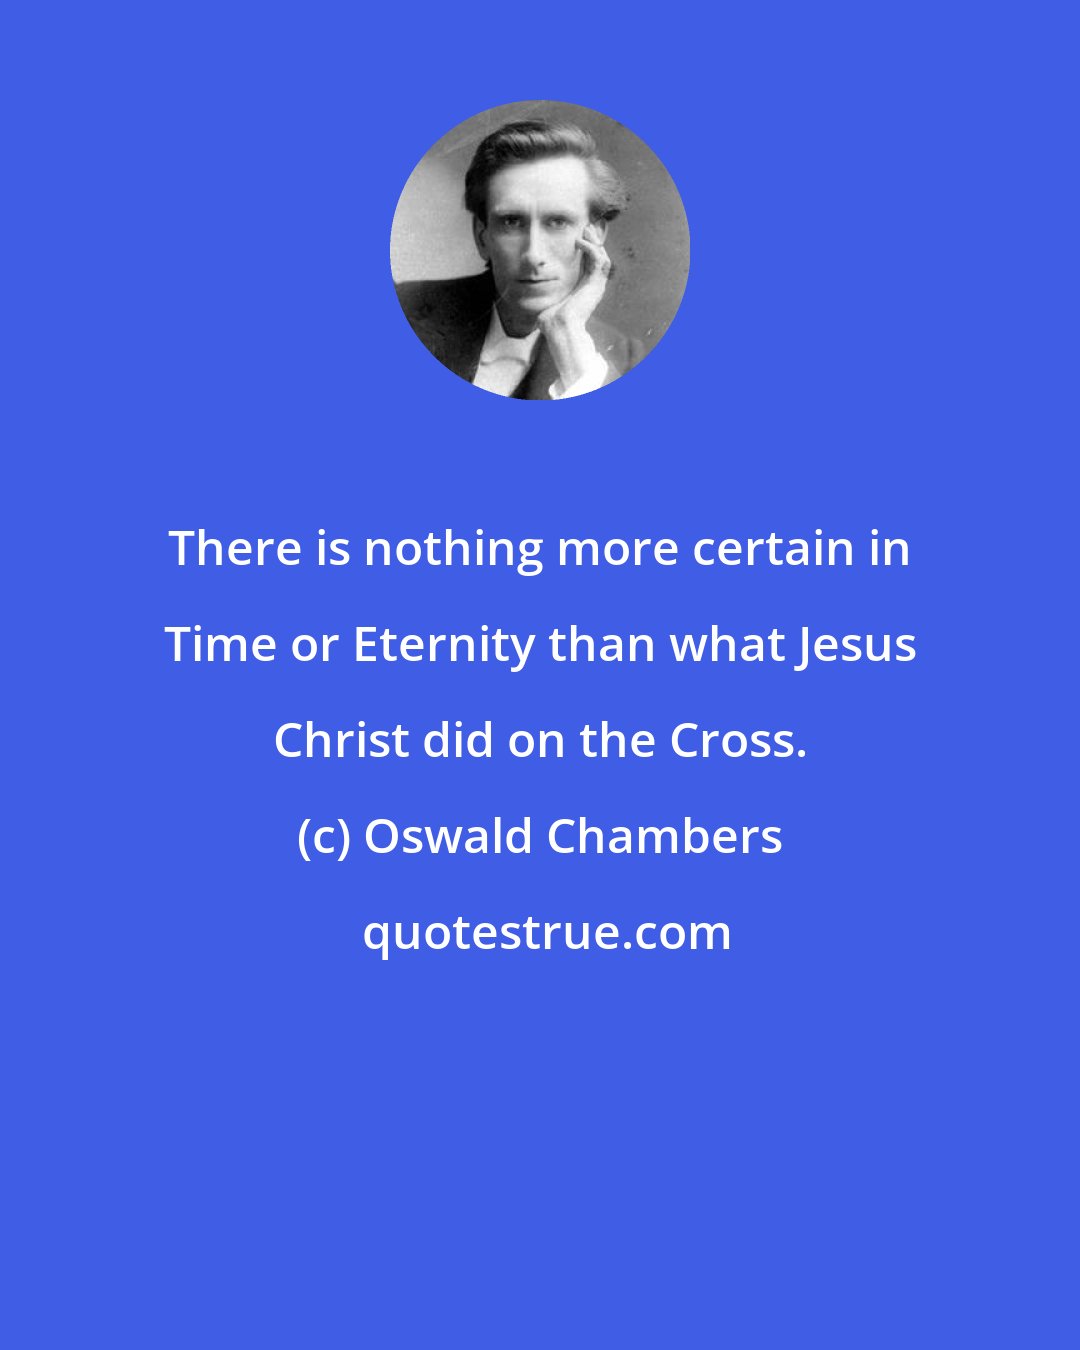 Oswald Chambers: There is nothing more certain in Time or Eternity than what Jesus Christ did on the Cross.